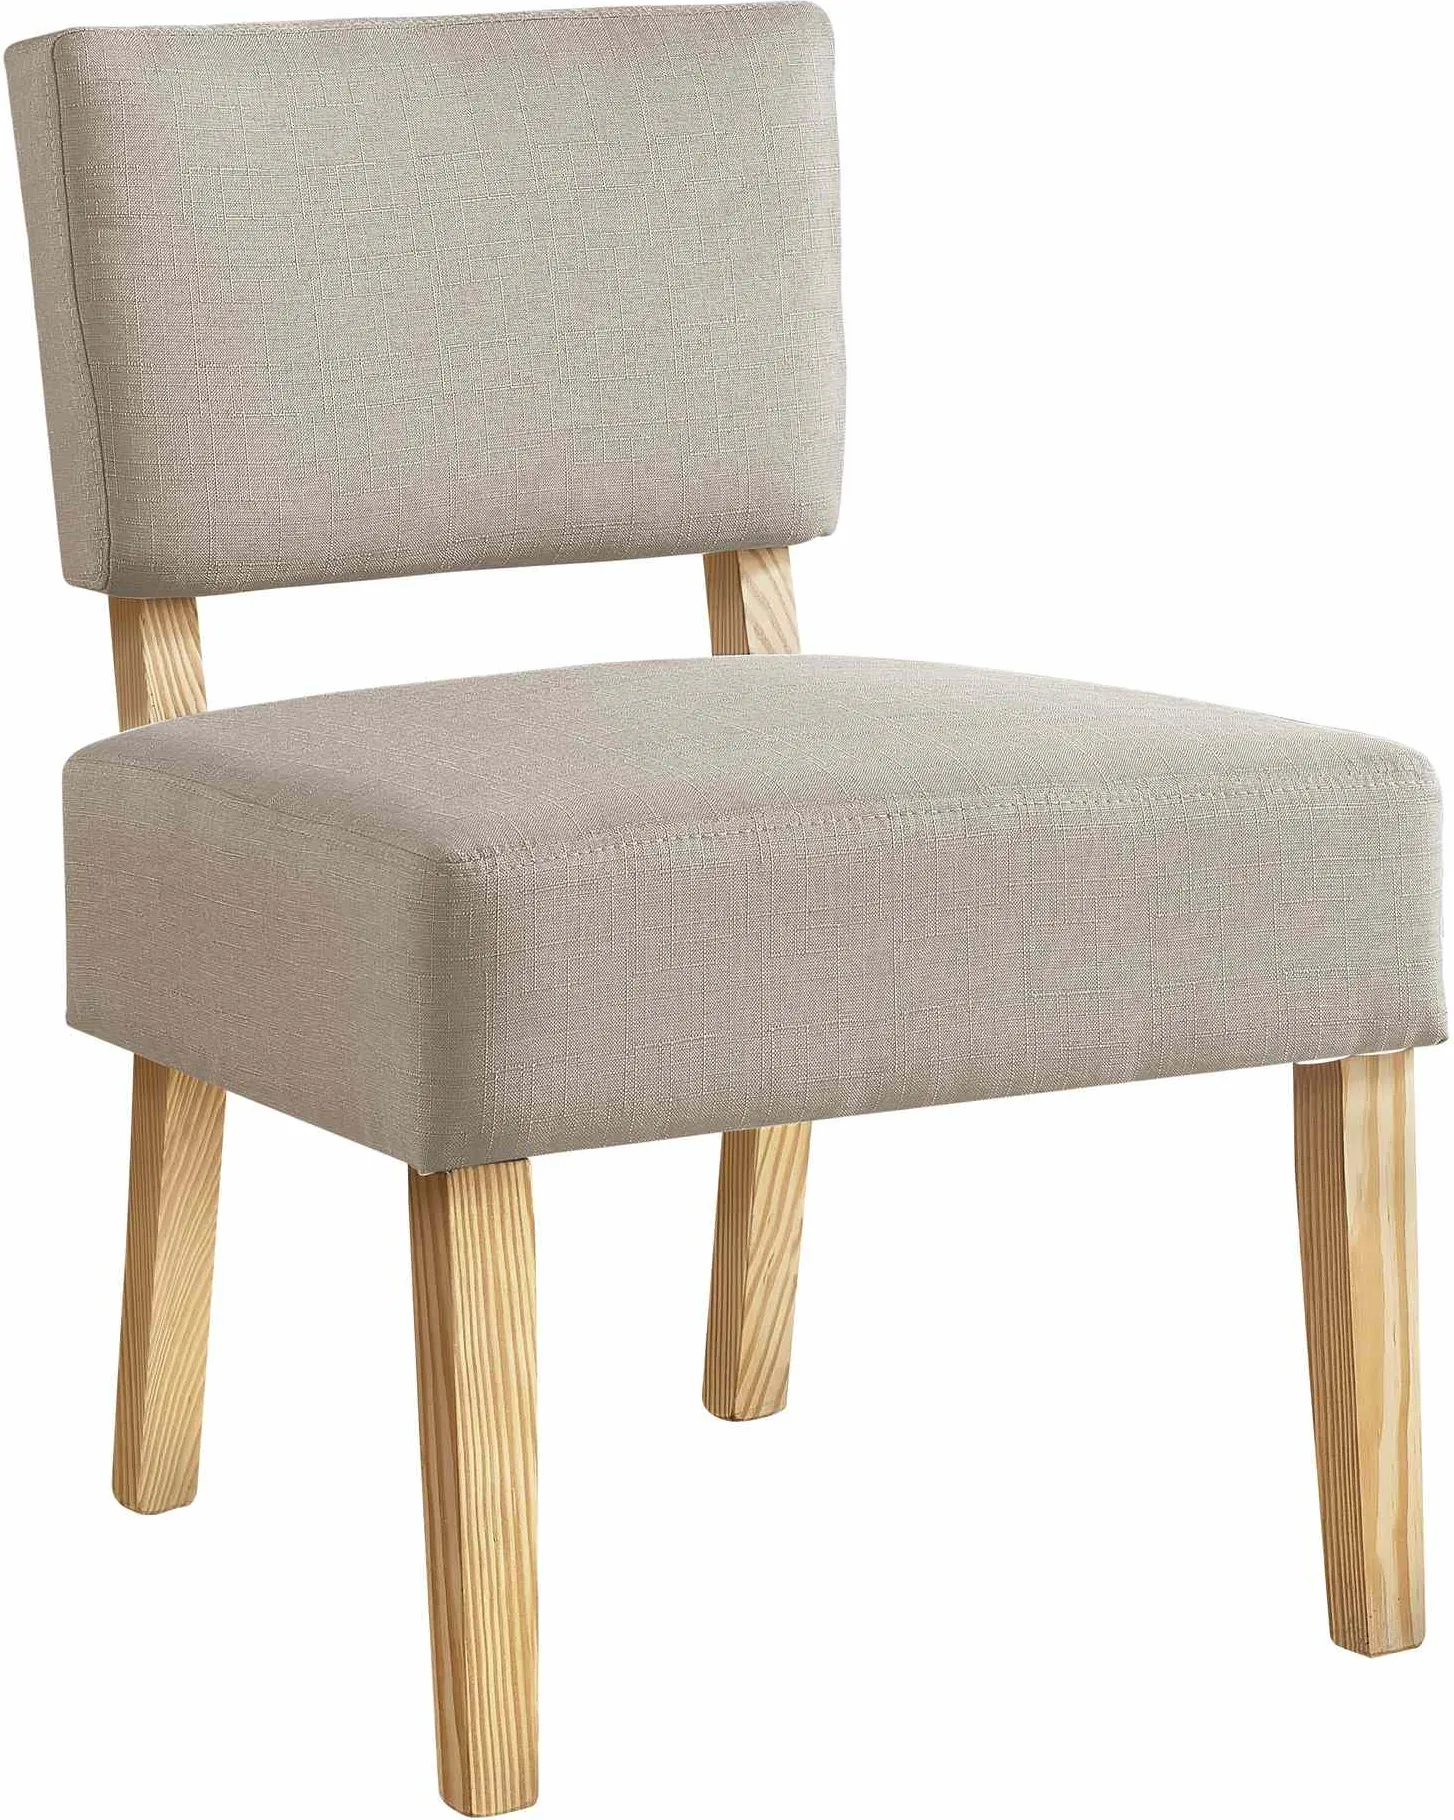 Accent Chair, Armless, Living Room, Bedroom, Fabric, Wood Legs, Beige, Natural, Transitional